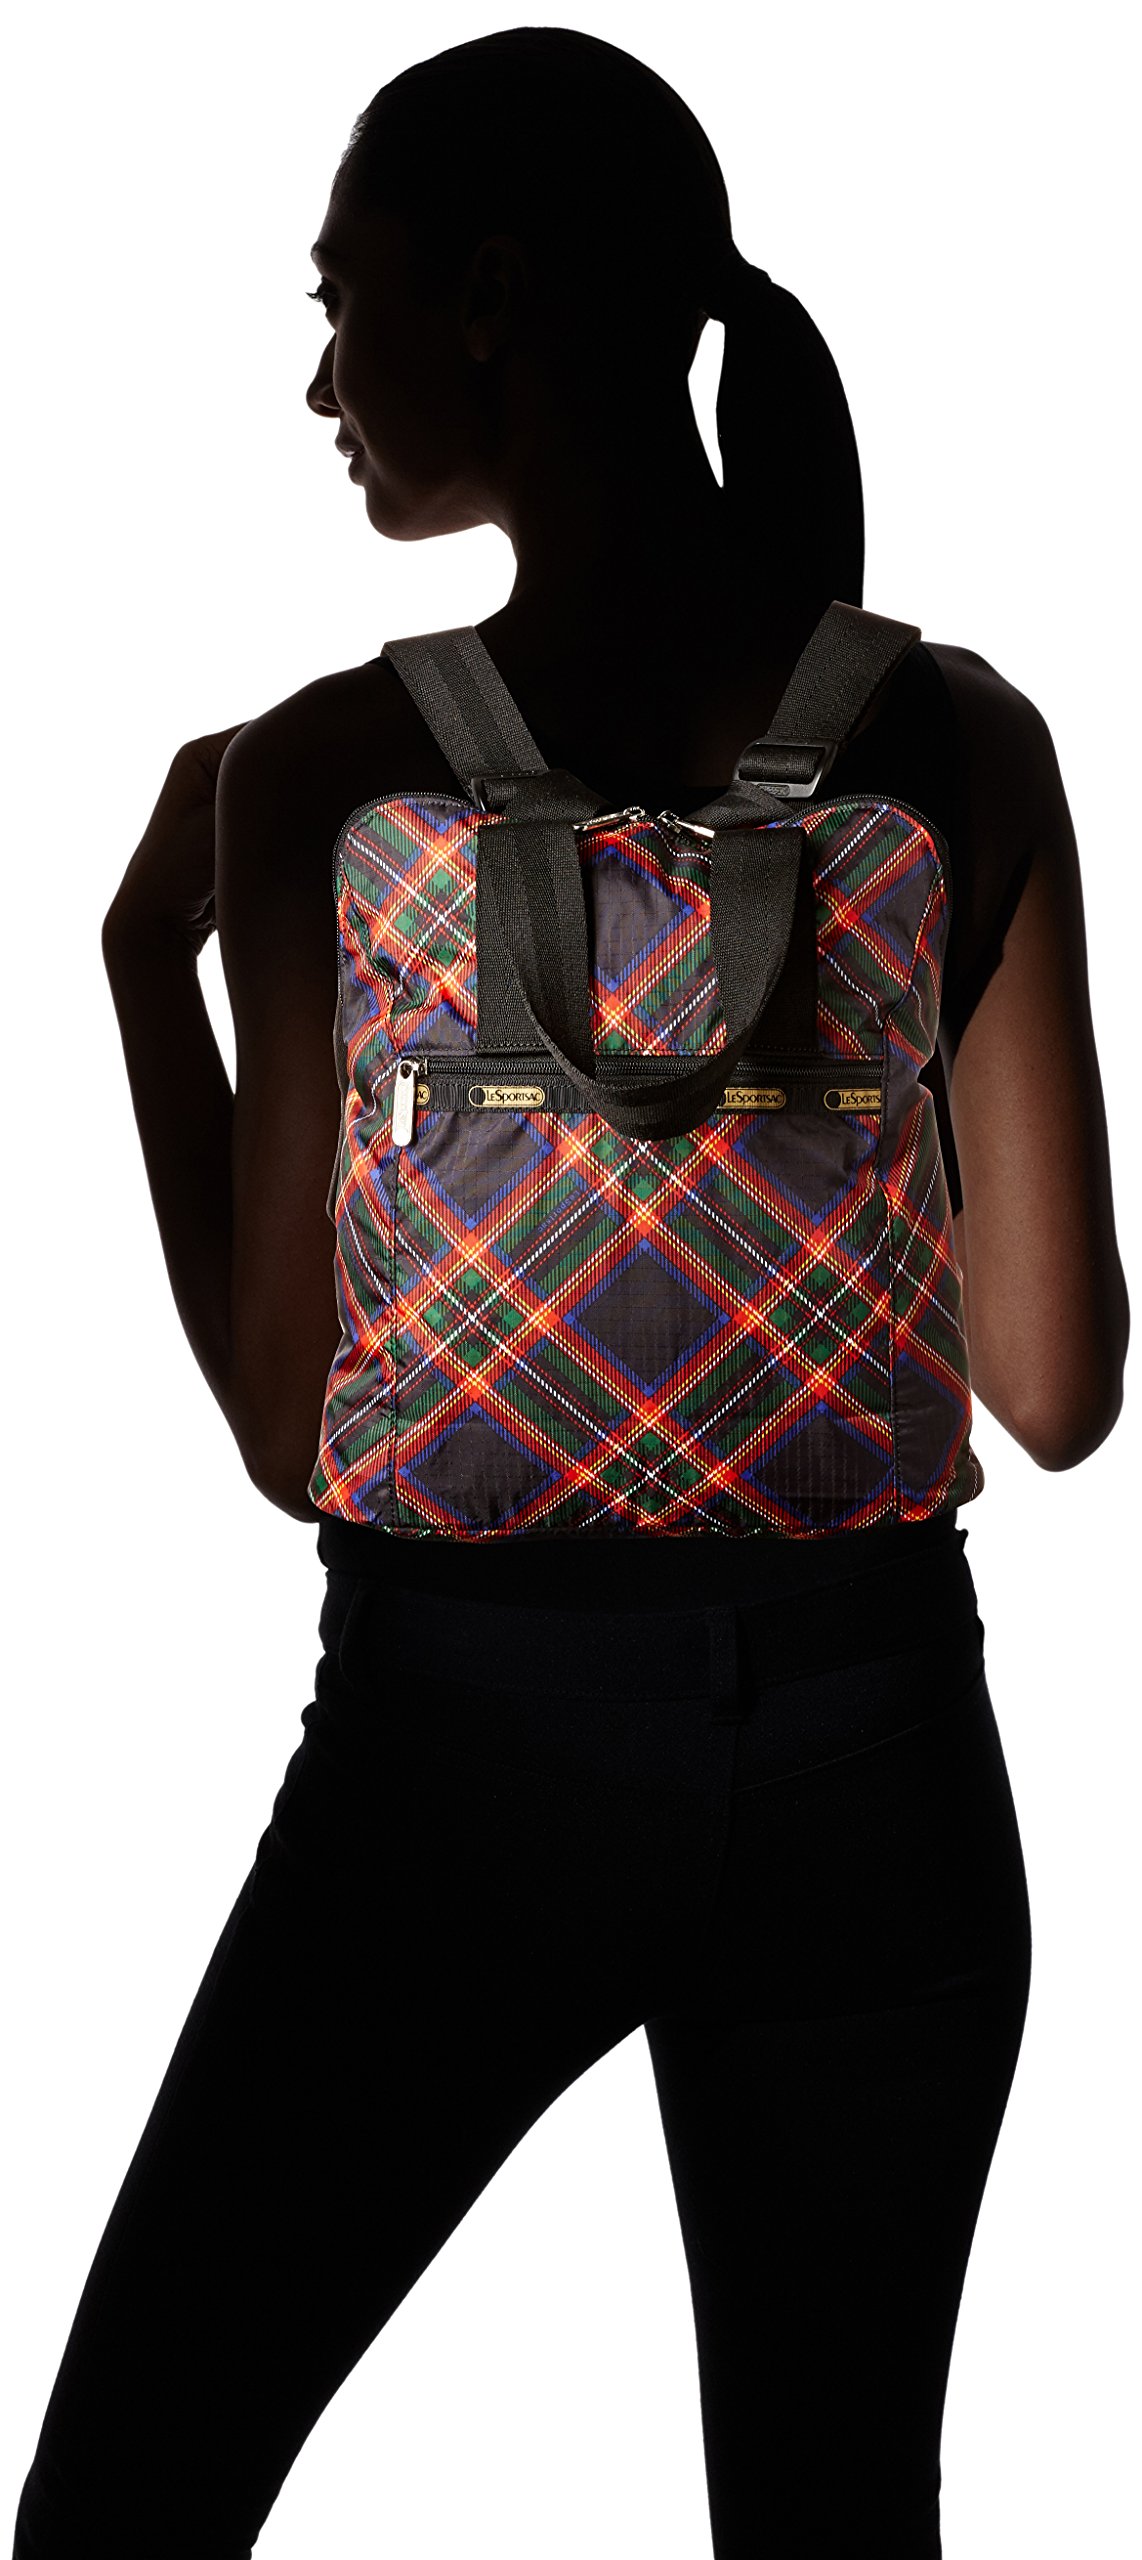 Everyday Backpack (Cozy Plaid Black) - image 3 of 4